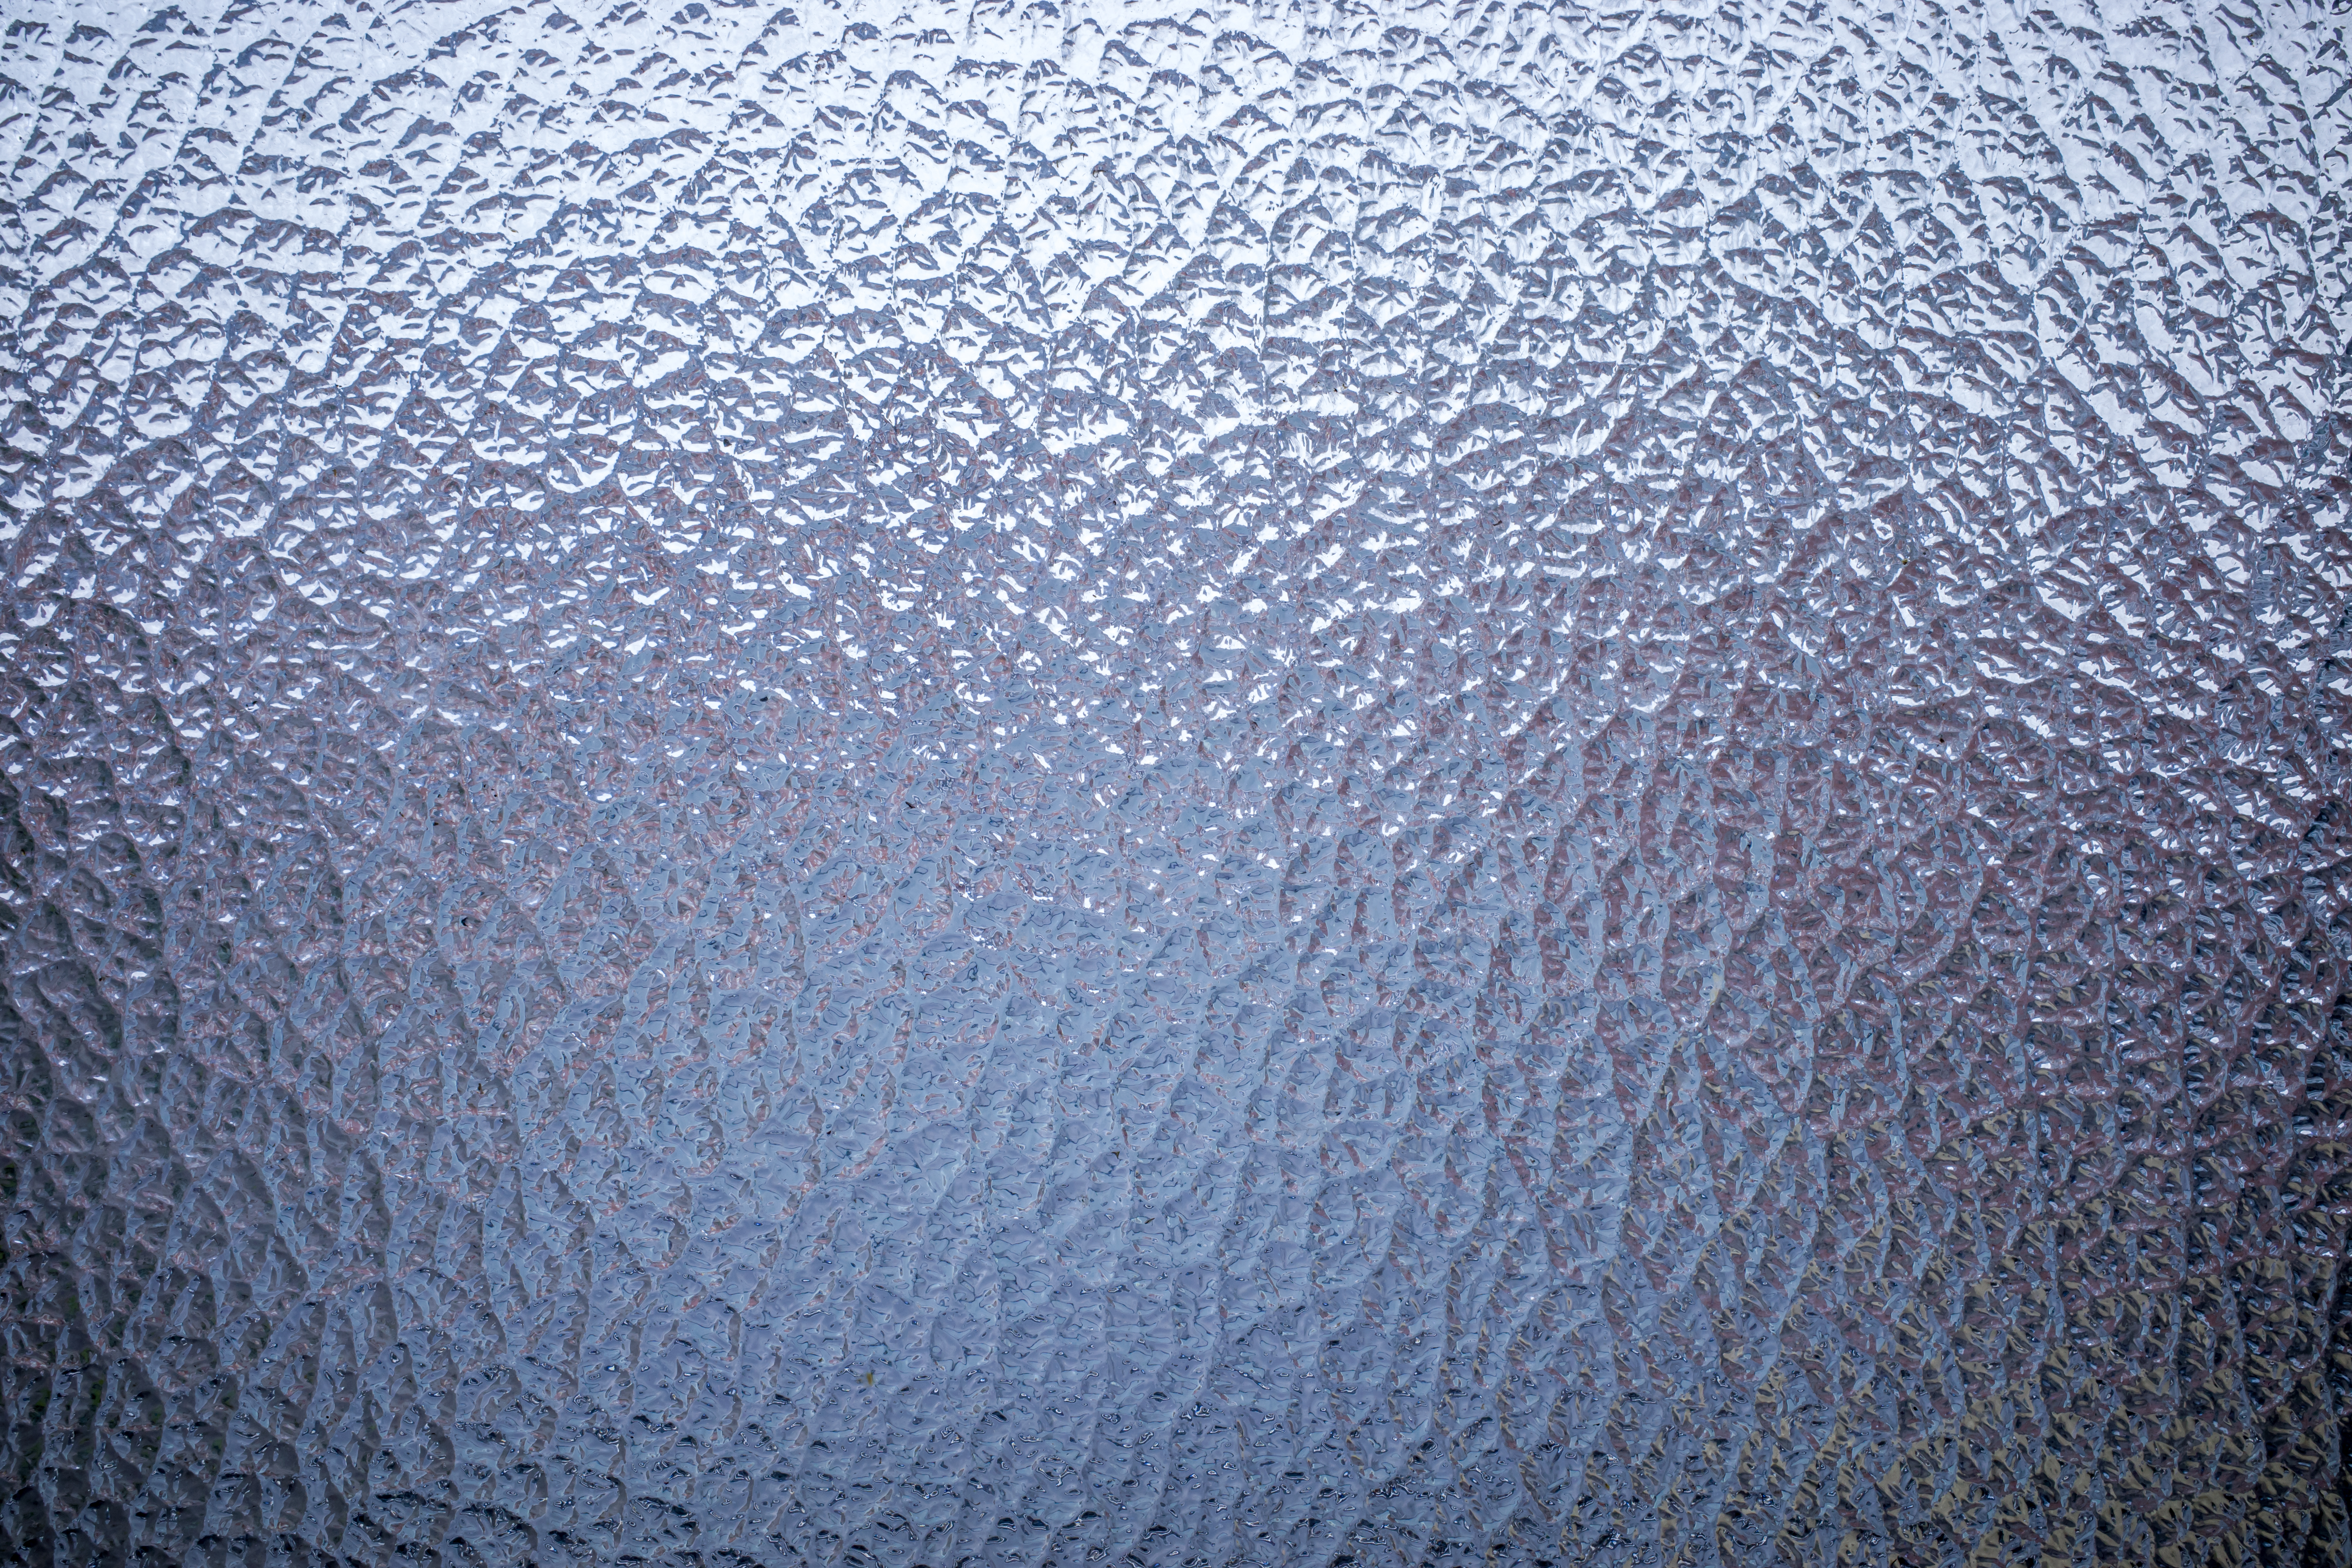 A close-up of frosted glass | Source: Getty Images